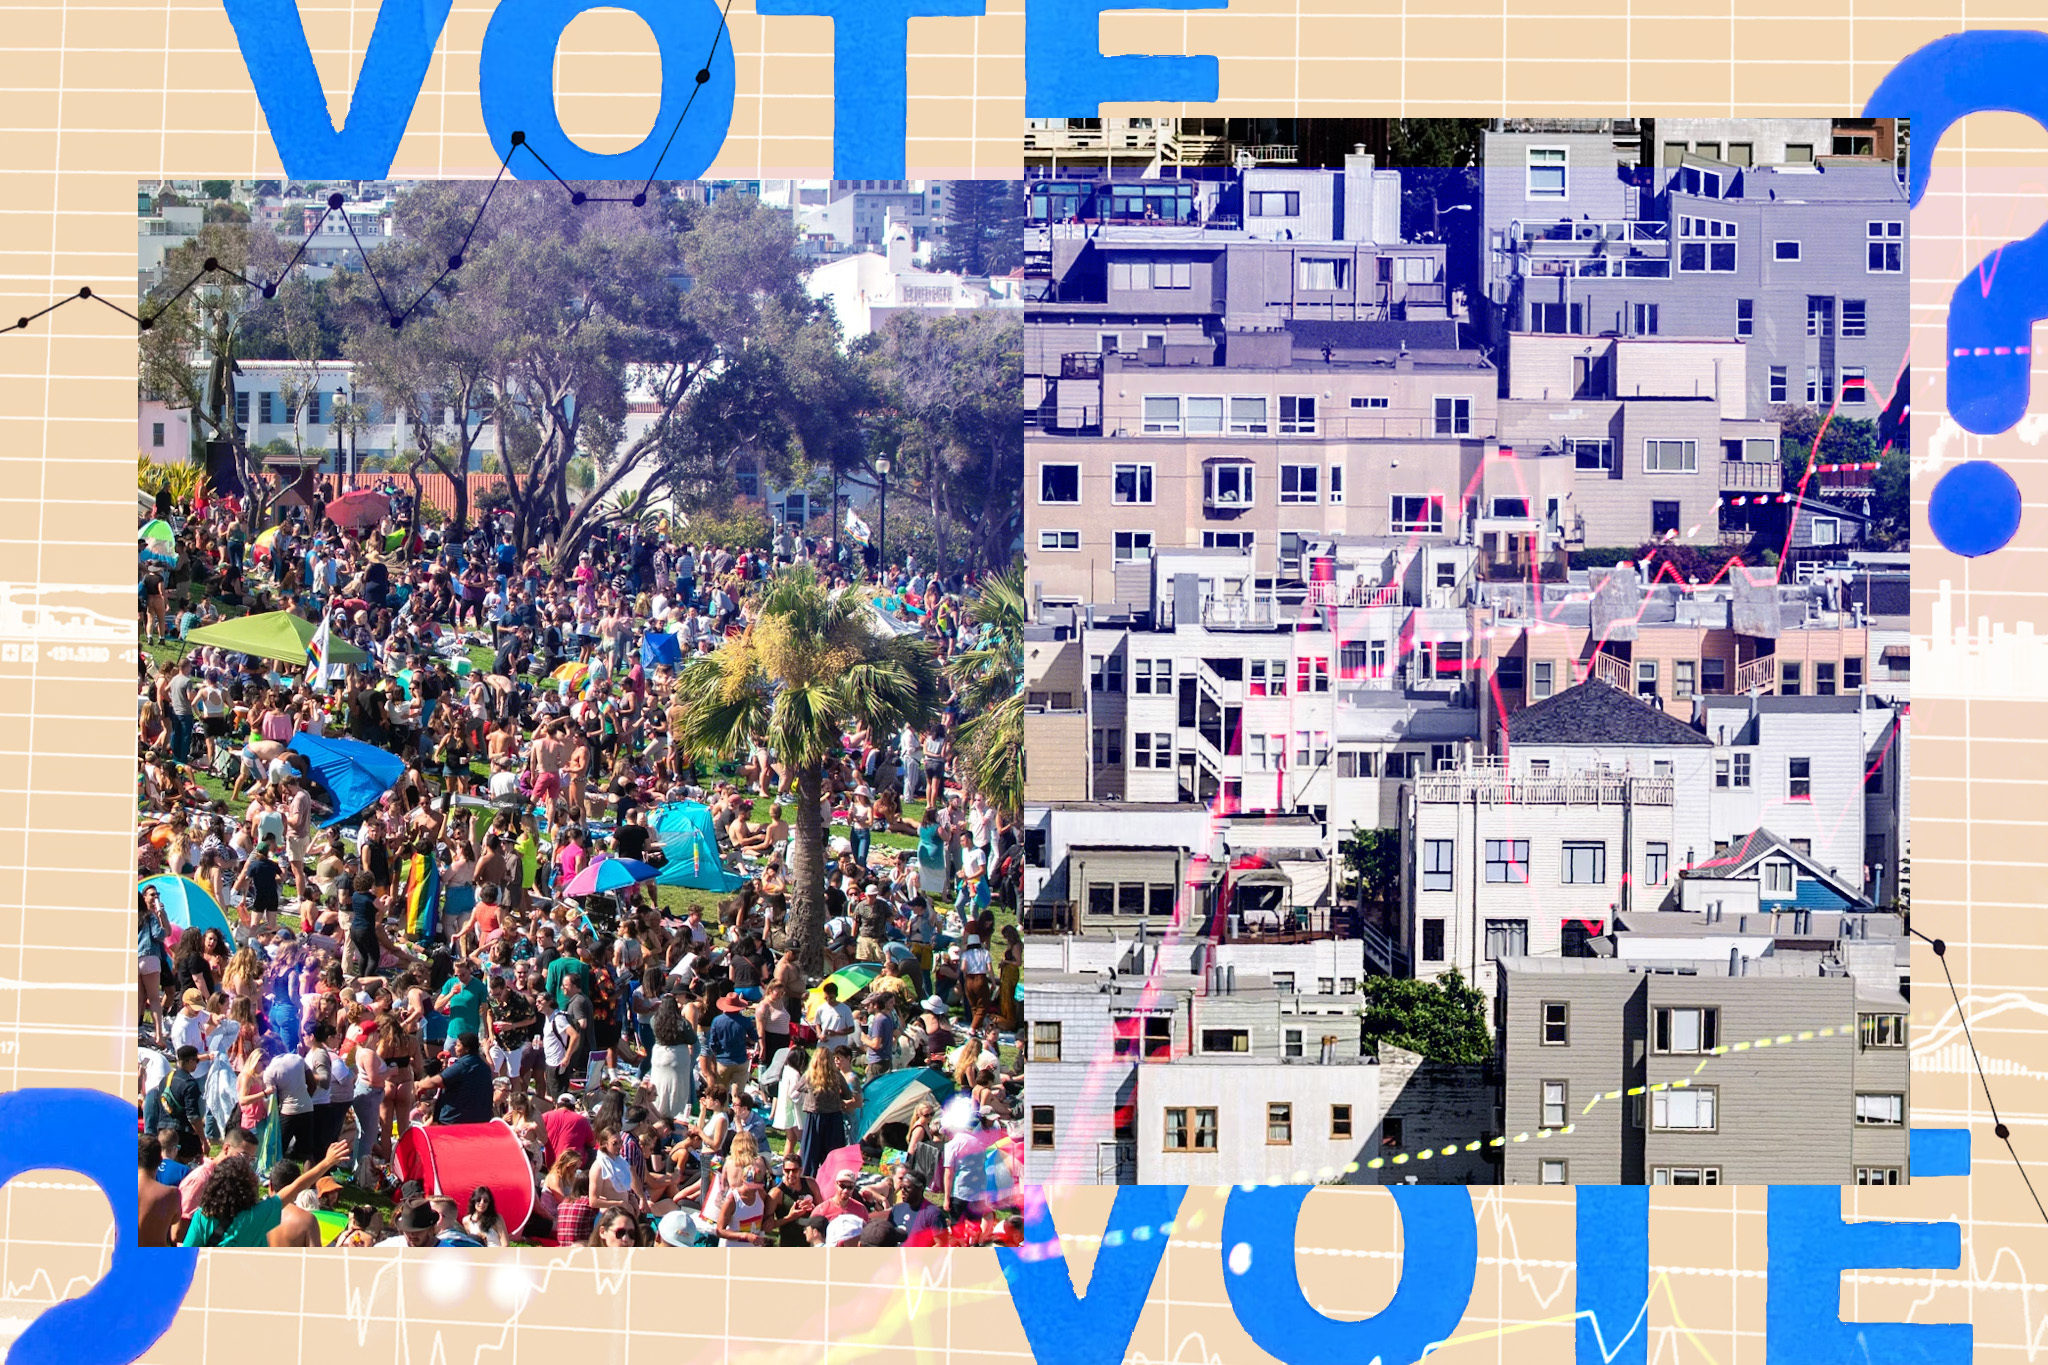 The image is divided: the left shows a bustling outdoor crowd with umbrellas and trees, while the right depicts densely packed multi-story buildings. Text "VOTE" overlays above.